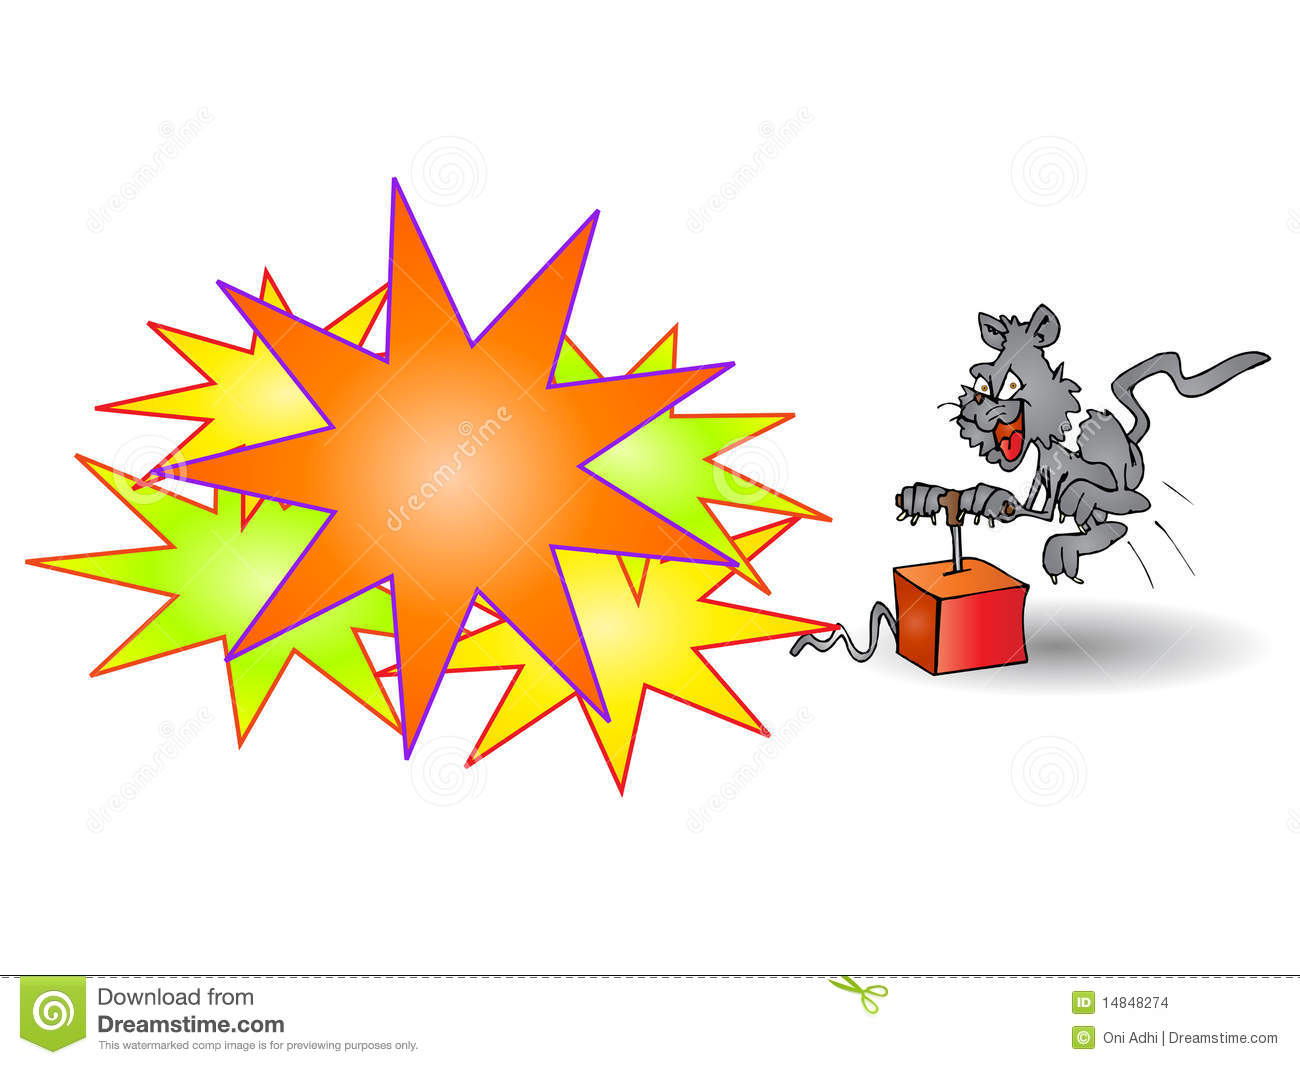 Crazy Cat Blow Of Dynamite Stock Images   Image  14848274